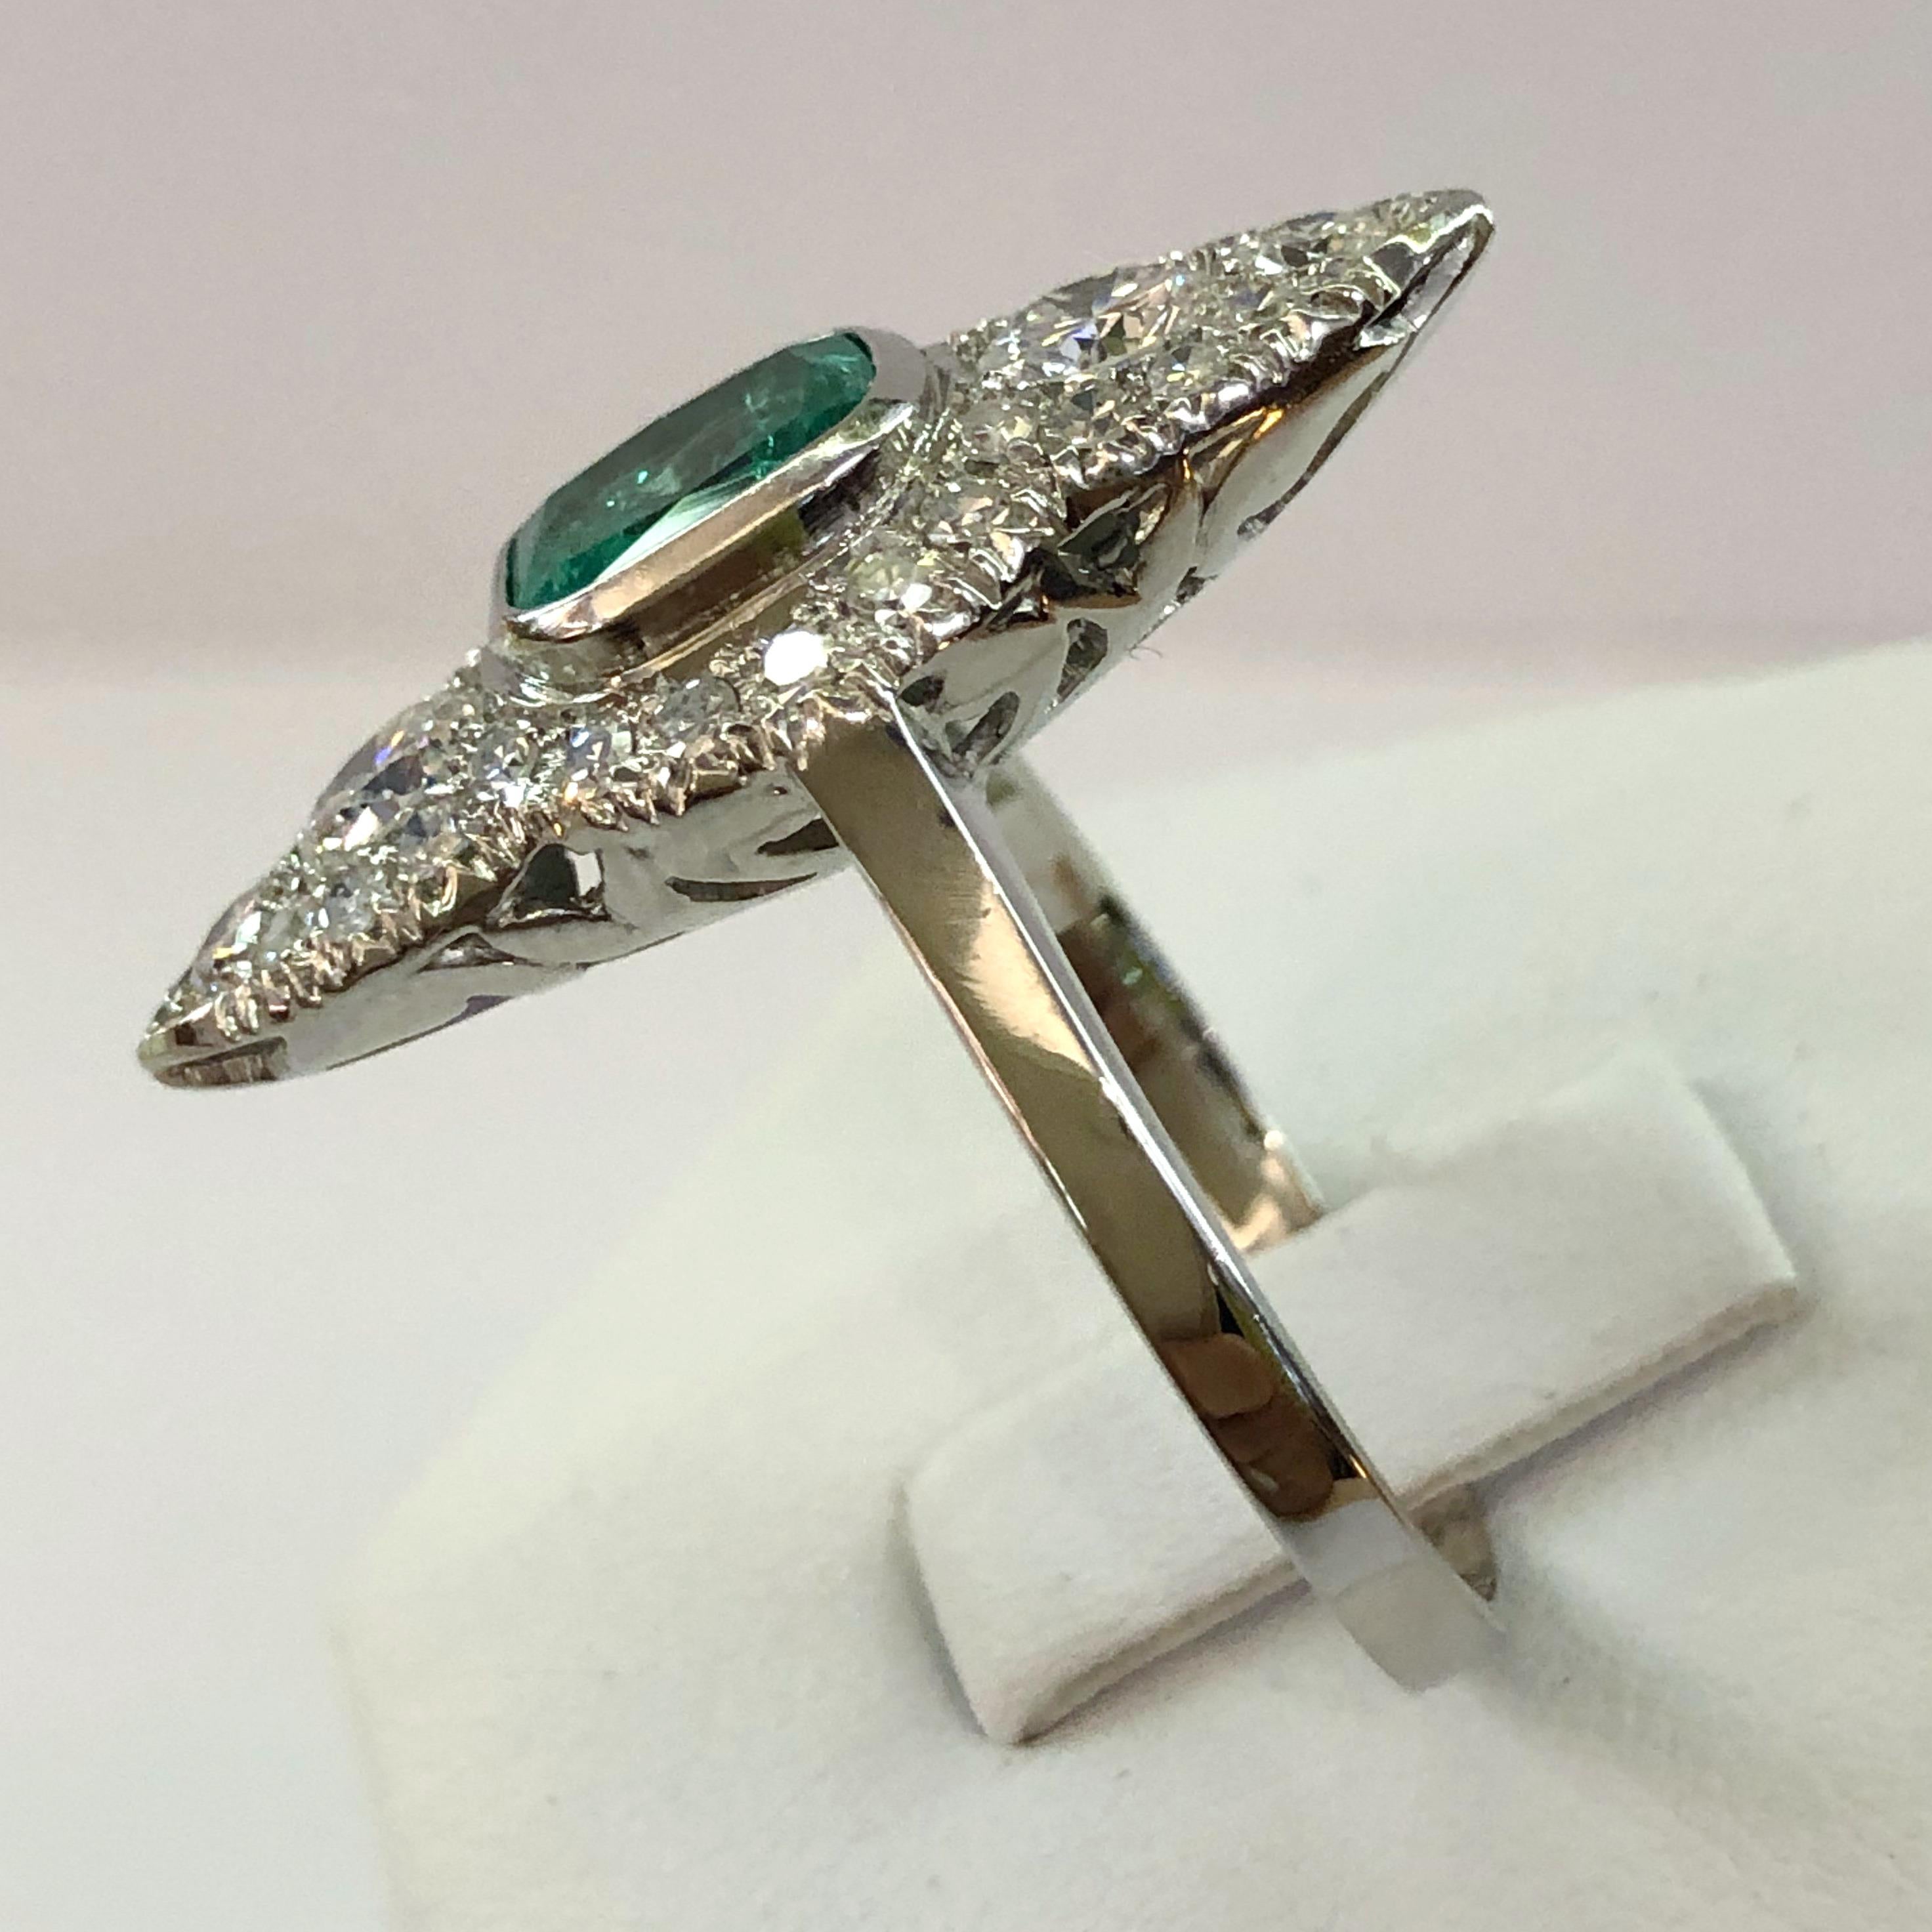 18 karat white gold lozenge shaped ring with a central emerald of 1.2 karats and brilliant diamonds for a total of 1 karat, Italy 1930s
Ring size US 8.5